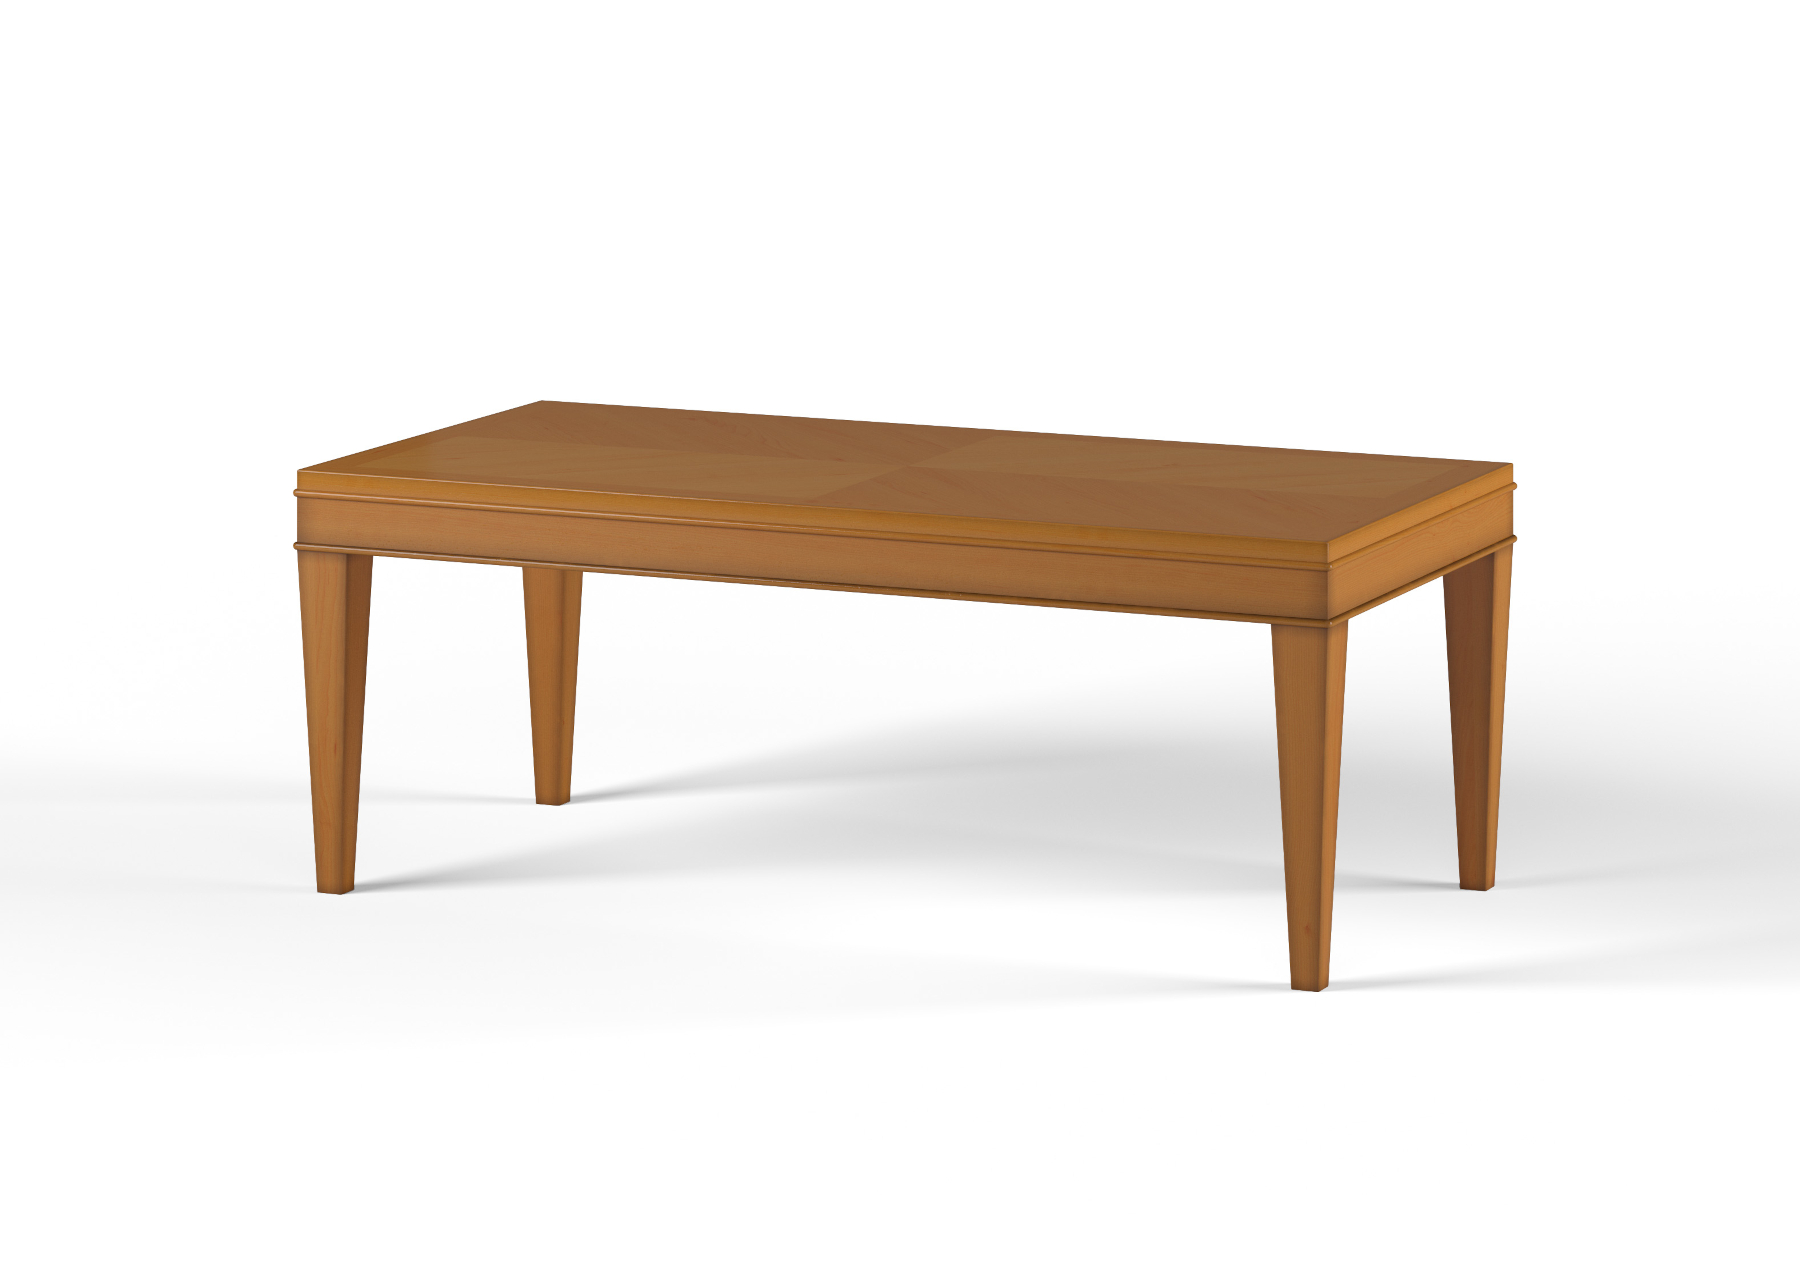  ODETTE COFFEE TABLE